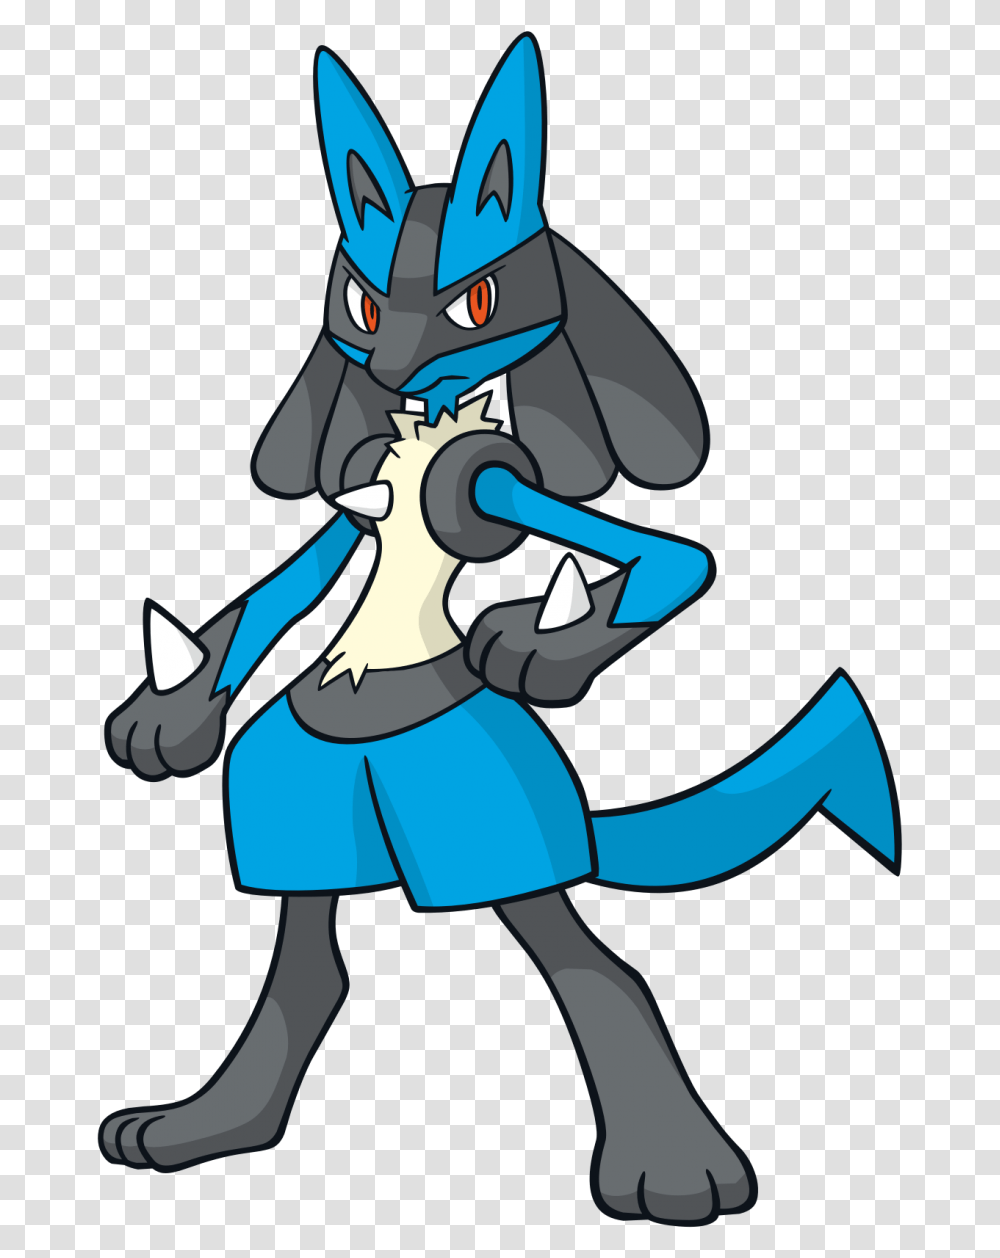 Global Link Imagedex Project Pokemon Forums Shiny Lucario, Costume, Clothing, Graphics, Art Transparent Png